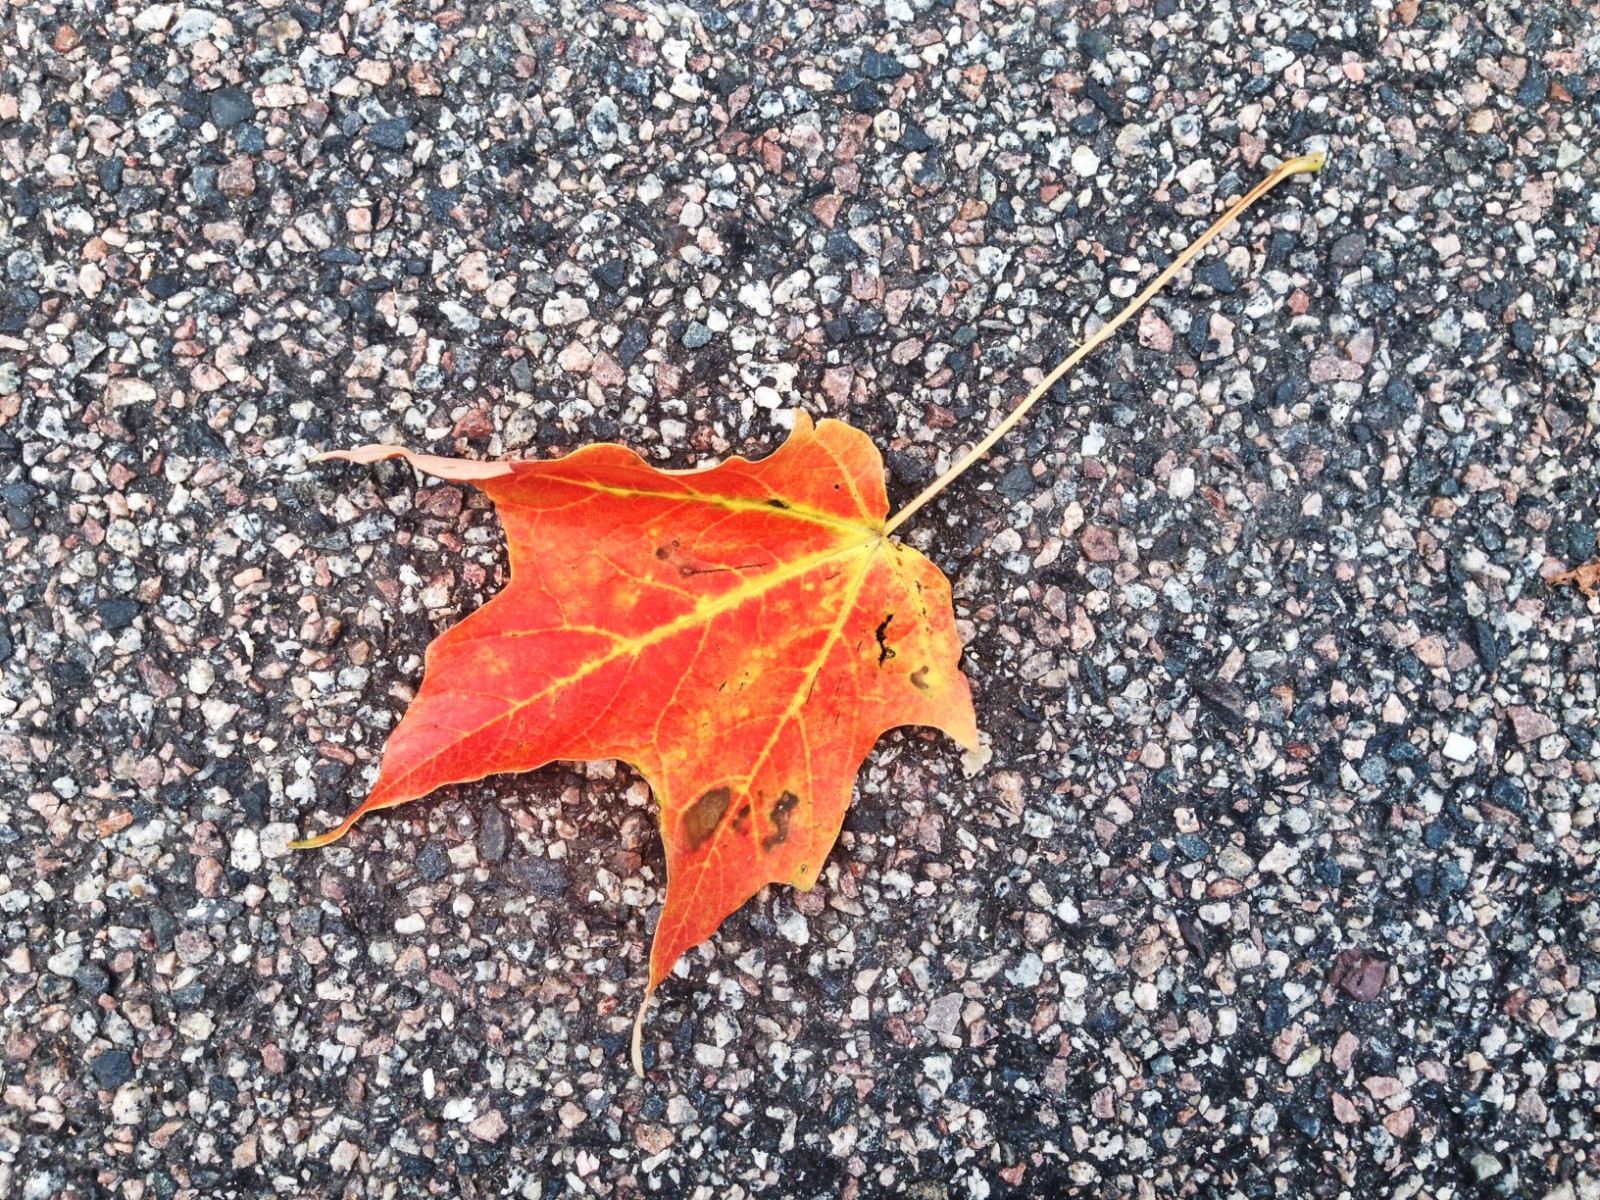 A brilliant orange and red leaf sitting on a tarmac surface